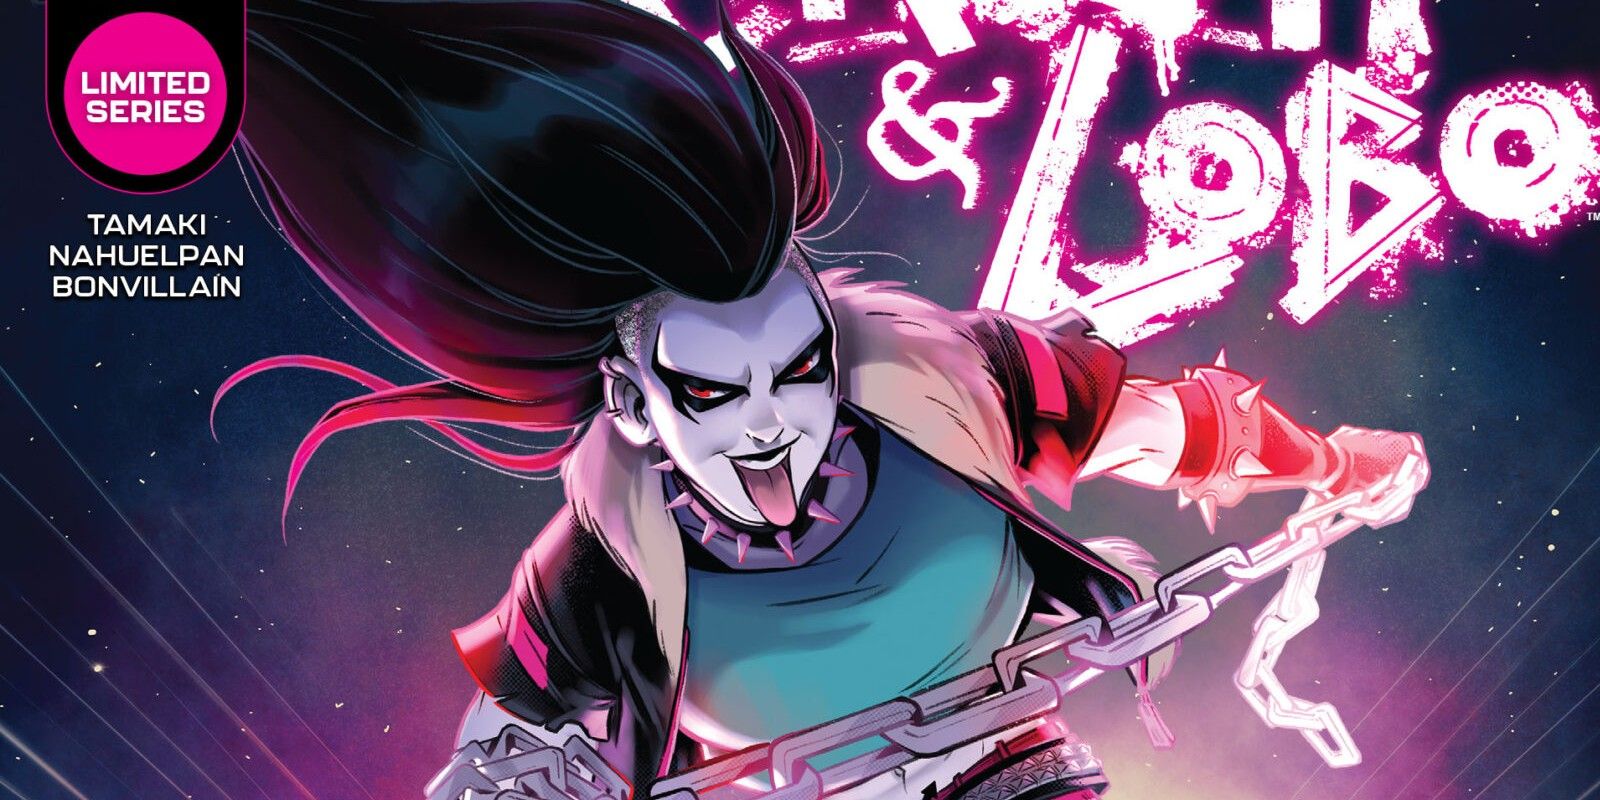 Crush on the cover of Crush and Lobo #5